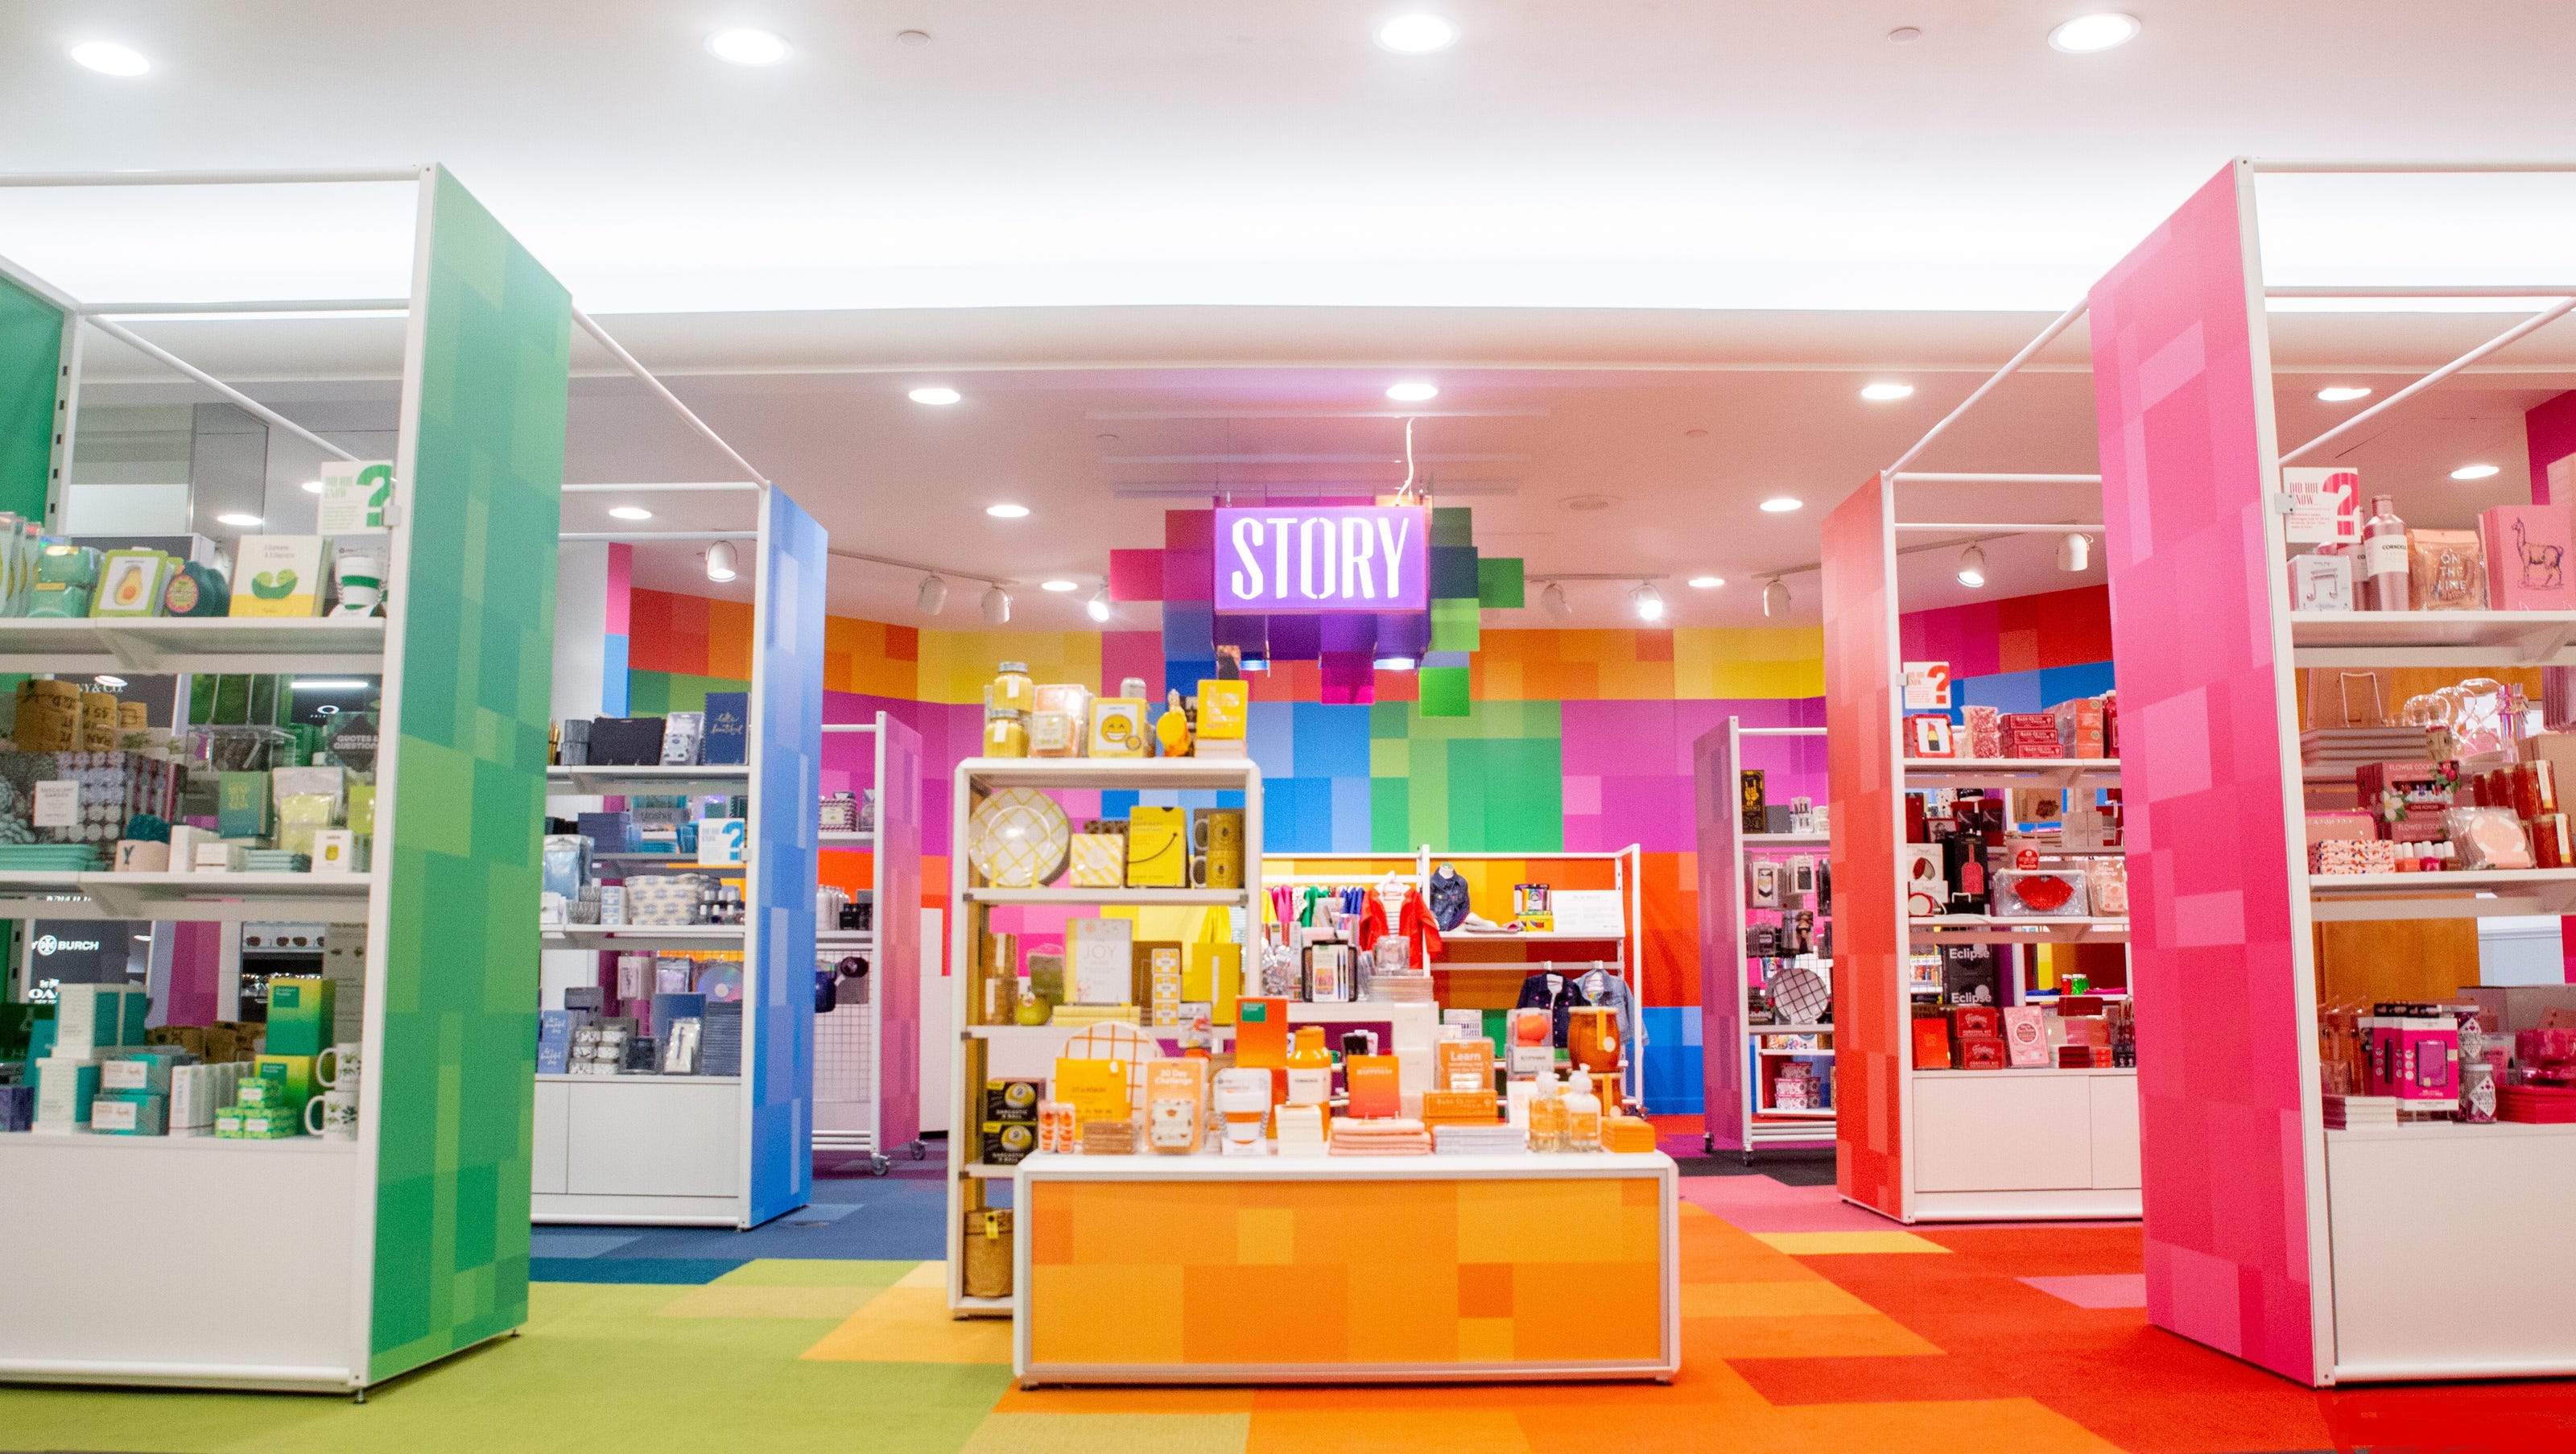 Macy's launches Story concept at 36 stores, including two in NJ malls